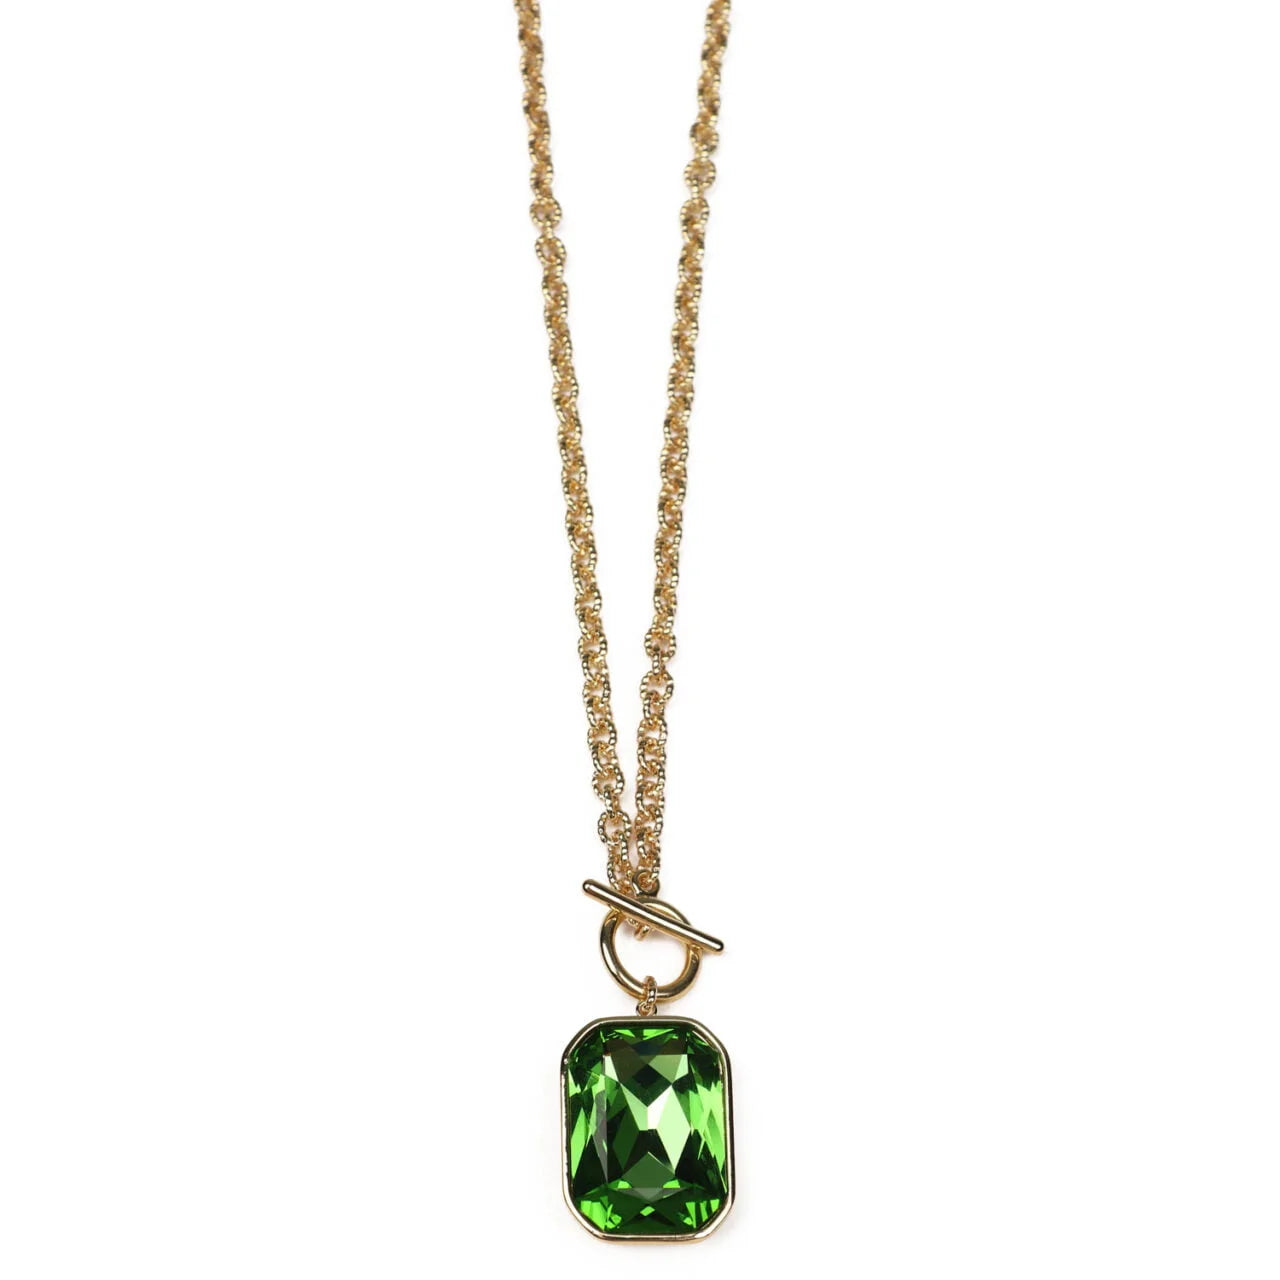 Fab Gifts | Jewellery Necklace Crystal Pendant Apple Green by Weirs of Baggot Street